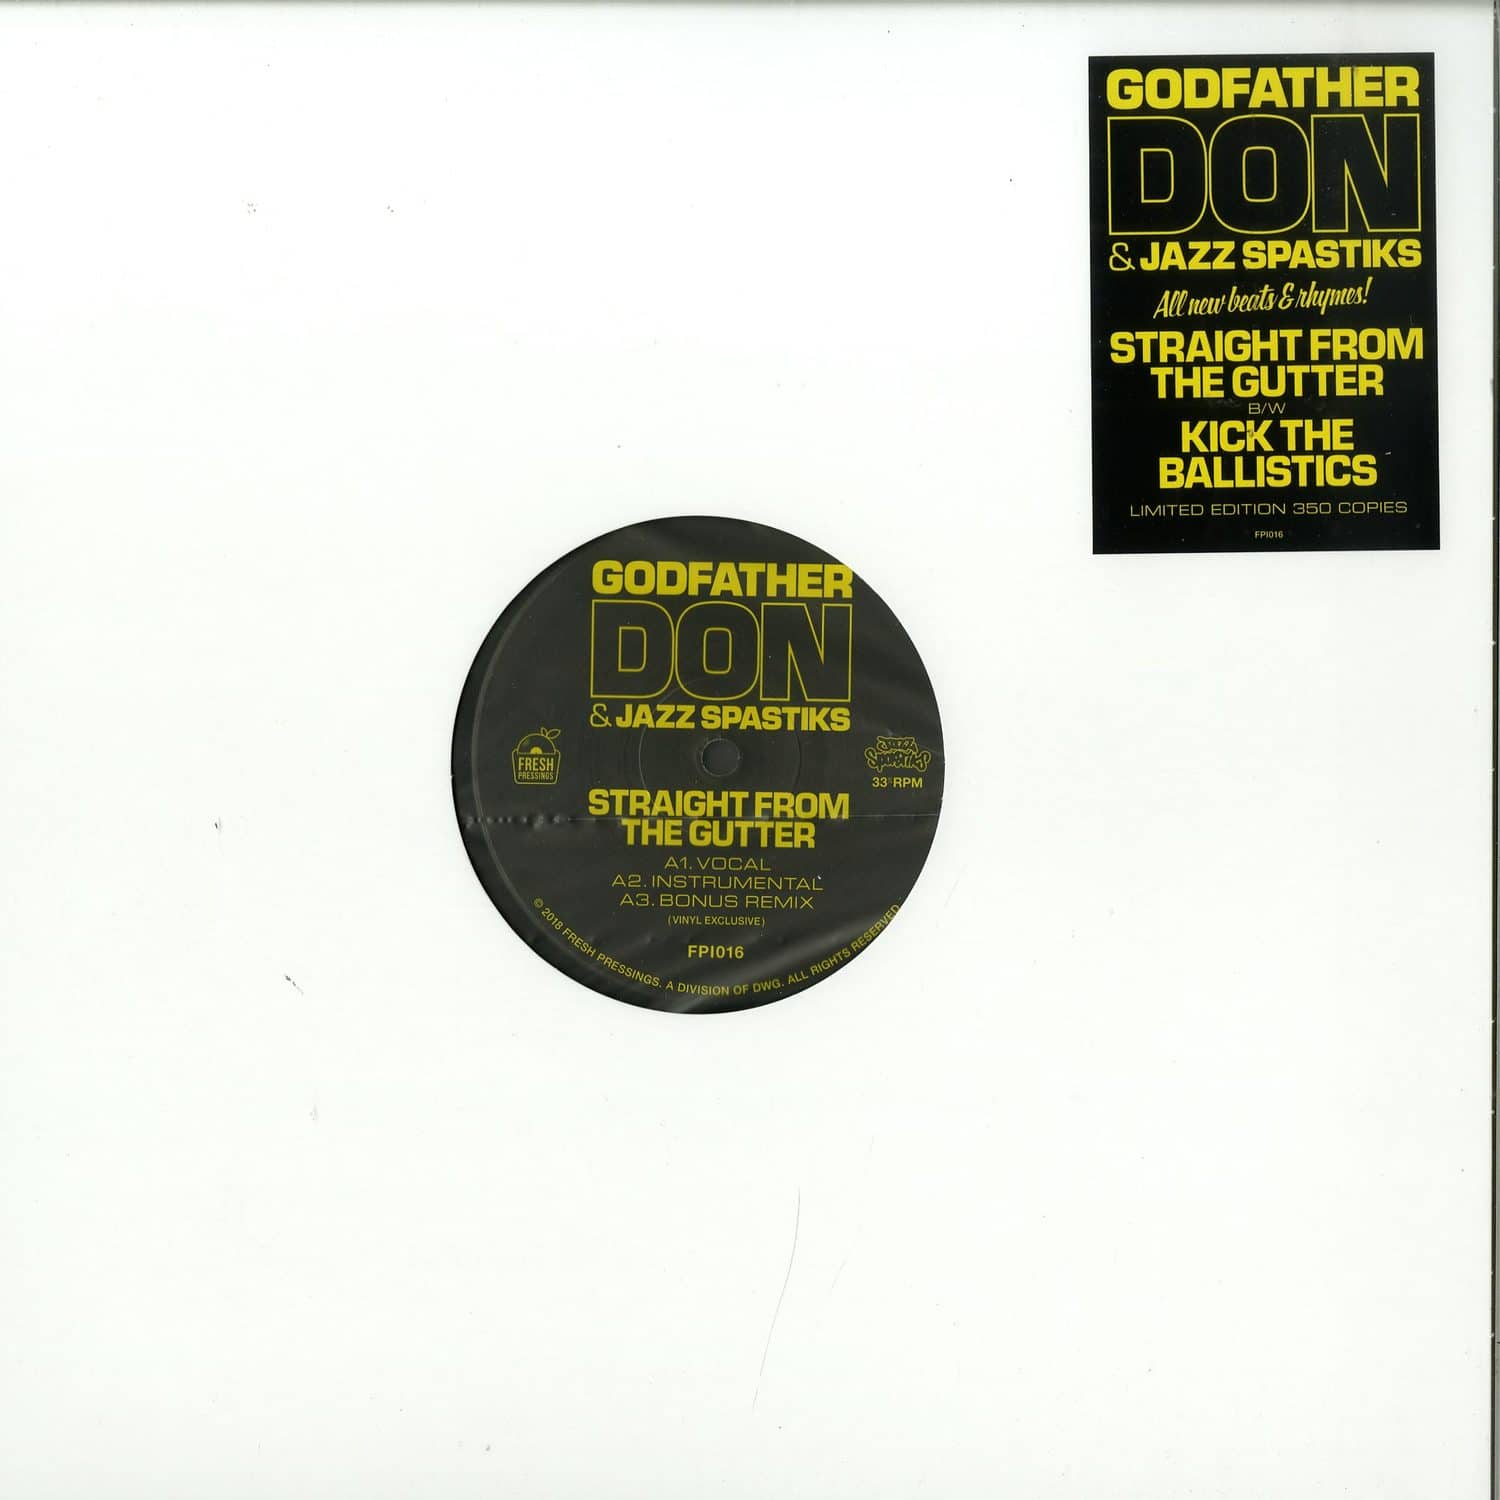 Godfather Don & Jazz Spastiks - STRAIGHT FROM THE GUTTER